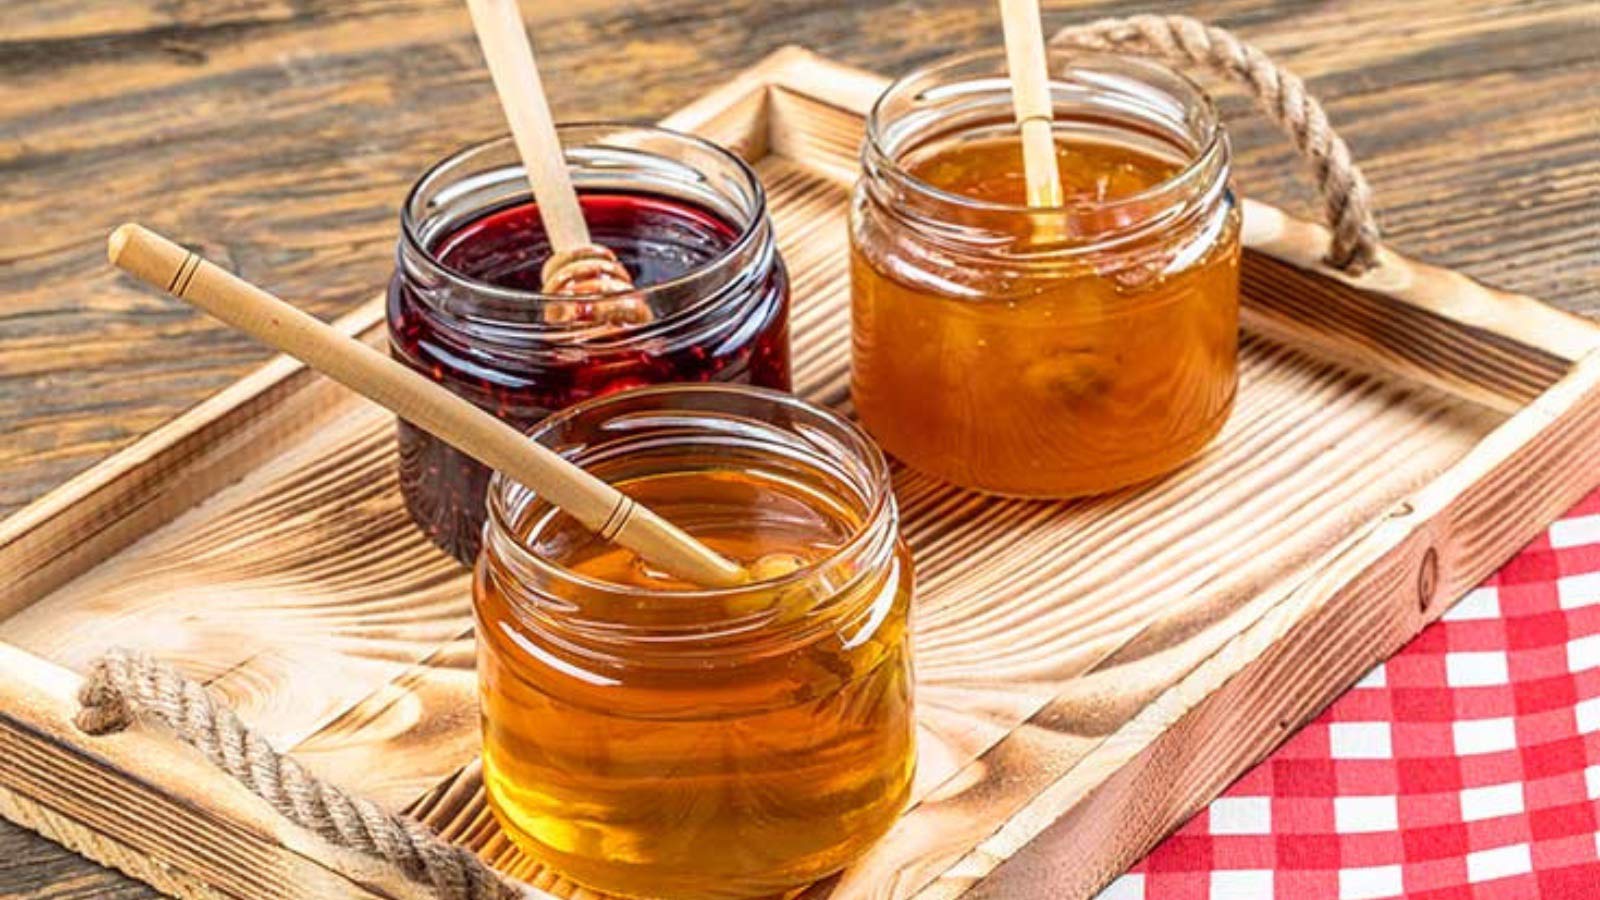 Three jars containing jams and honey on a wood serving tray.